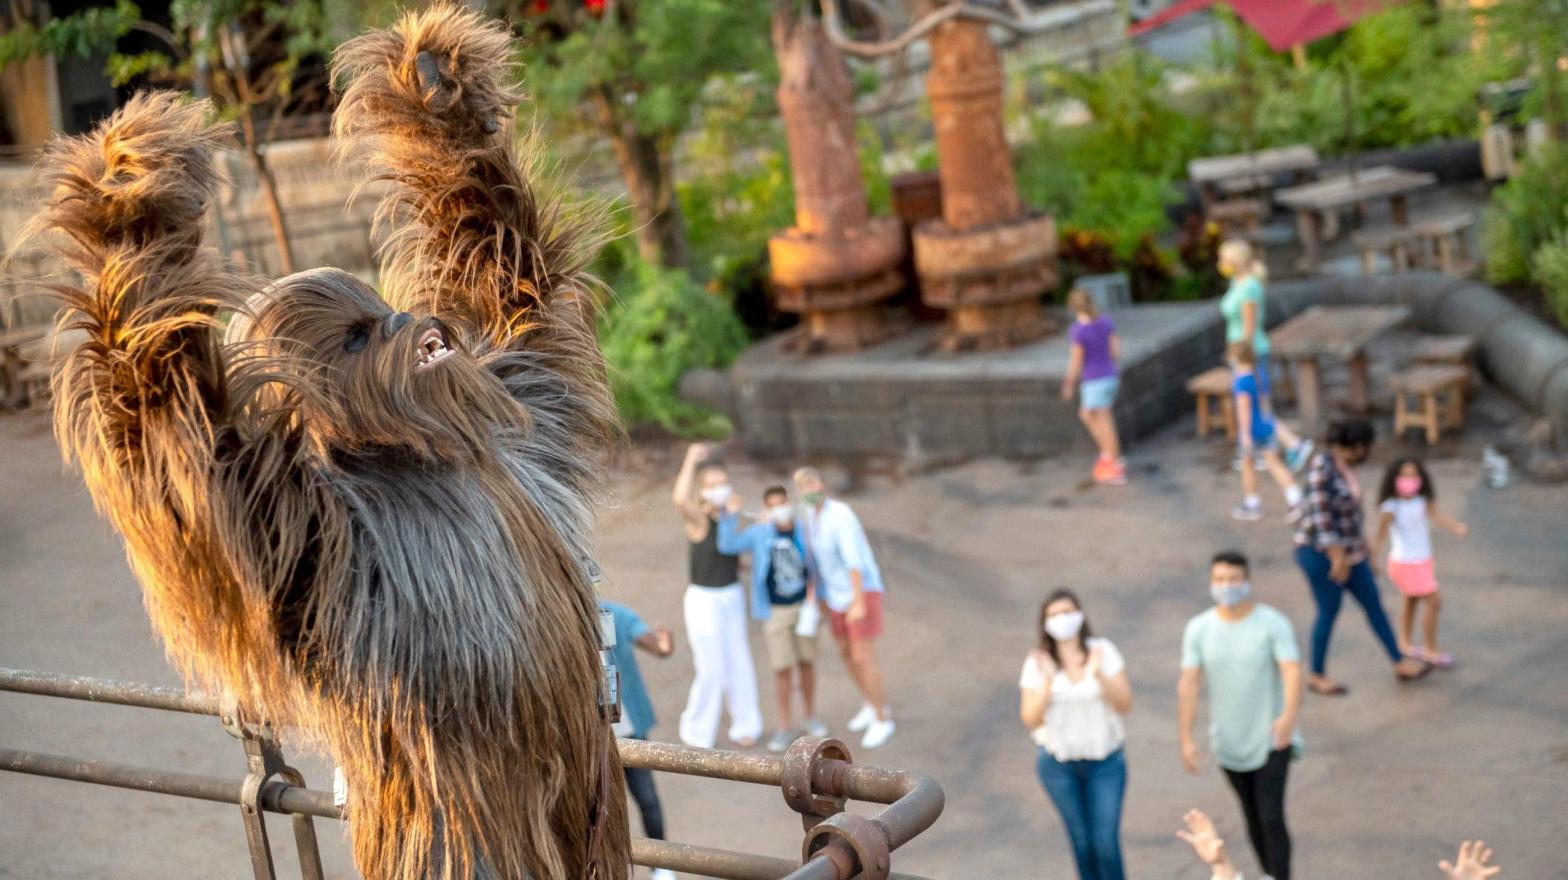 Chewbacca, the filthy ape creature of the so-called Warring Stars film franchise, seen at Disneyland in Anaheim, California. (Photo: Walt Disney World Resorts via Getty Images, Getty Images)